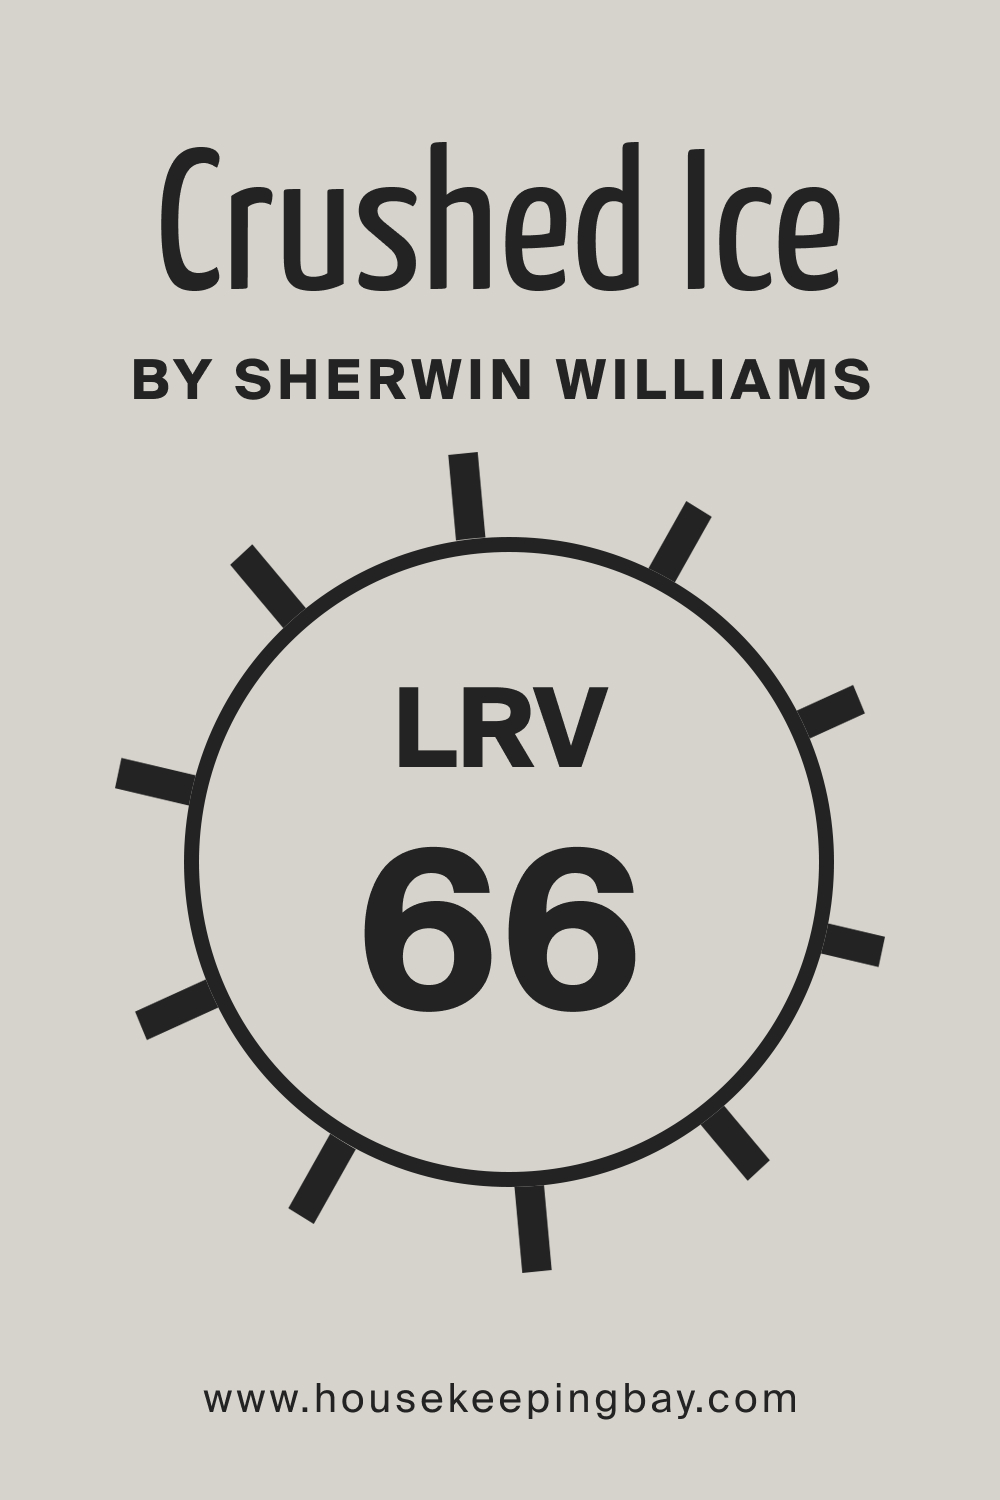 Crushed Ice SW 7647 by Sherwin Williams. LRV 66